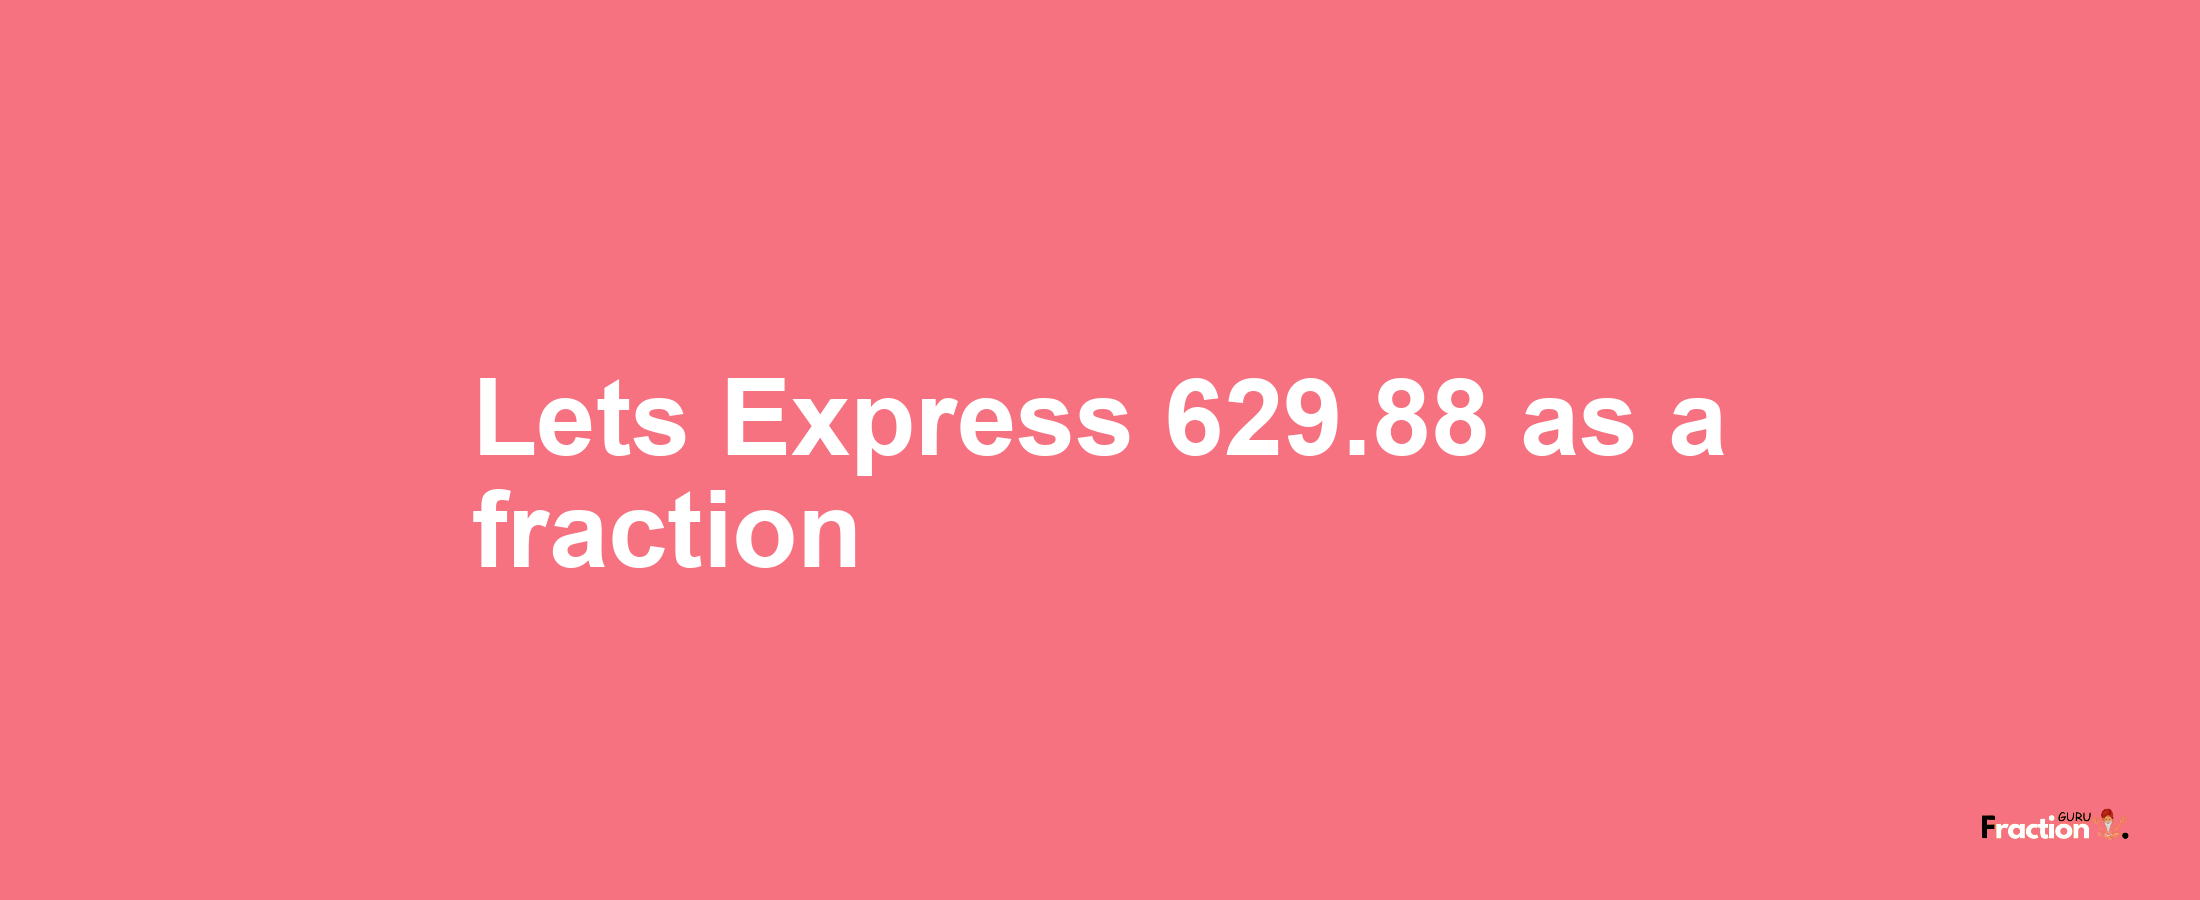 Lets Express 629.88 as afraction